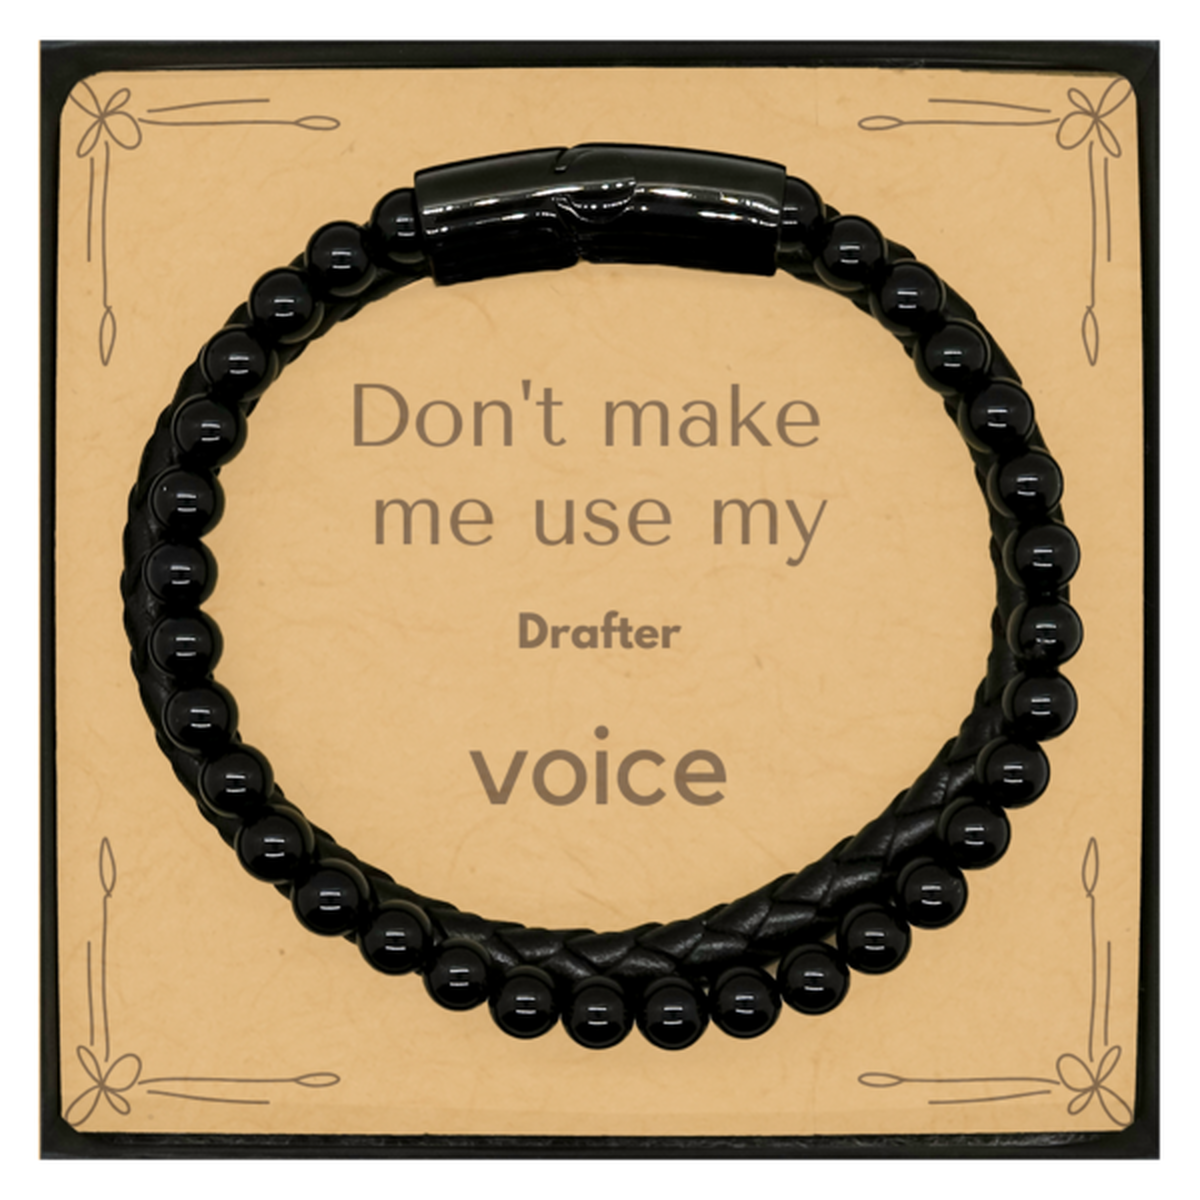 Don't make me use my Drafter voice, Sarcasm Drafter Card Gifts, Christmas Drafter Stone Leather Bracelets Birthday Unique Gifts For Drafter Coworkers, Men, Women, Colleague, Friends